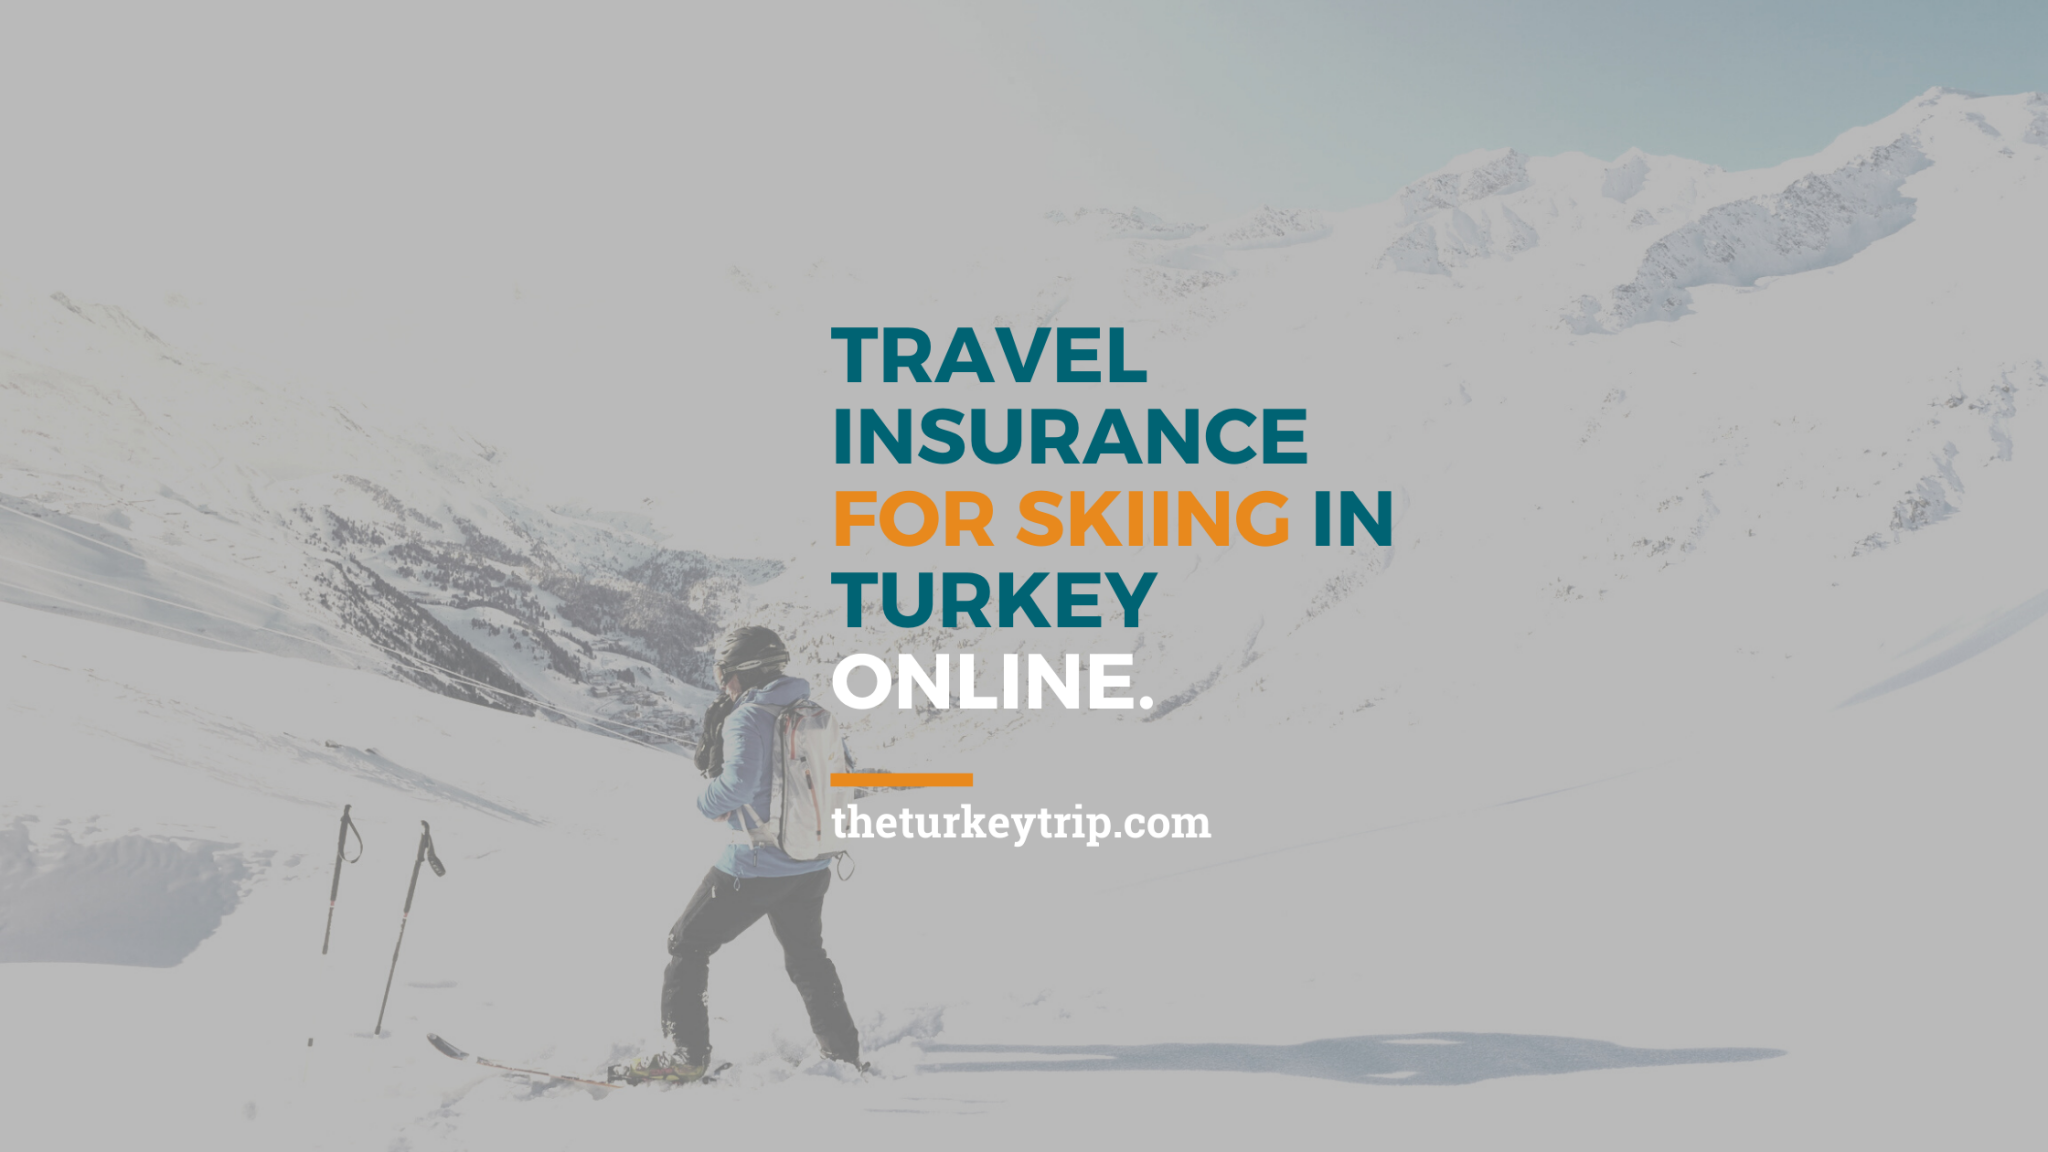 what travel insurance do you need for turkey